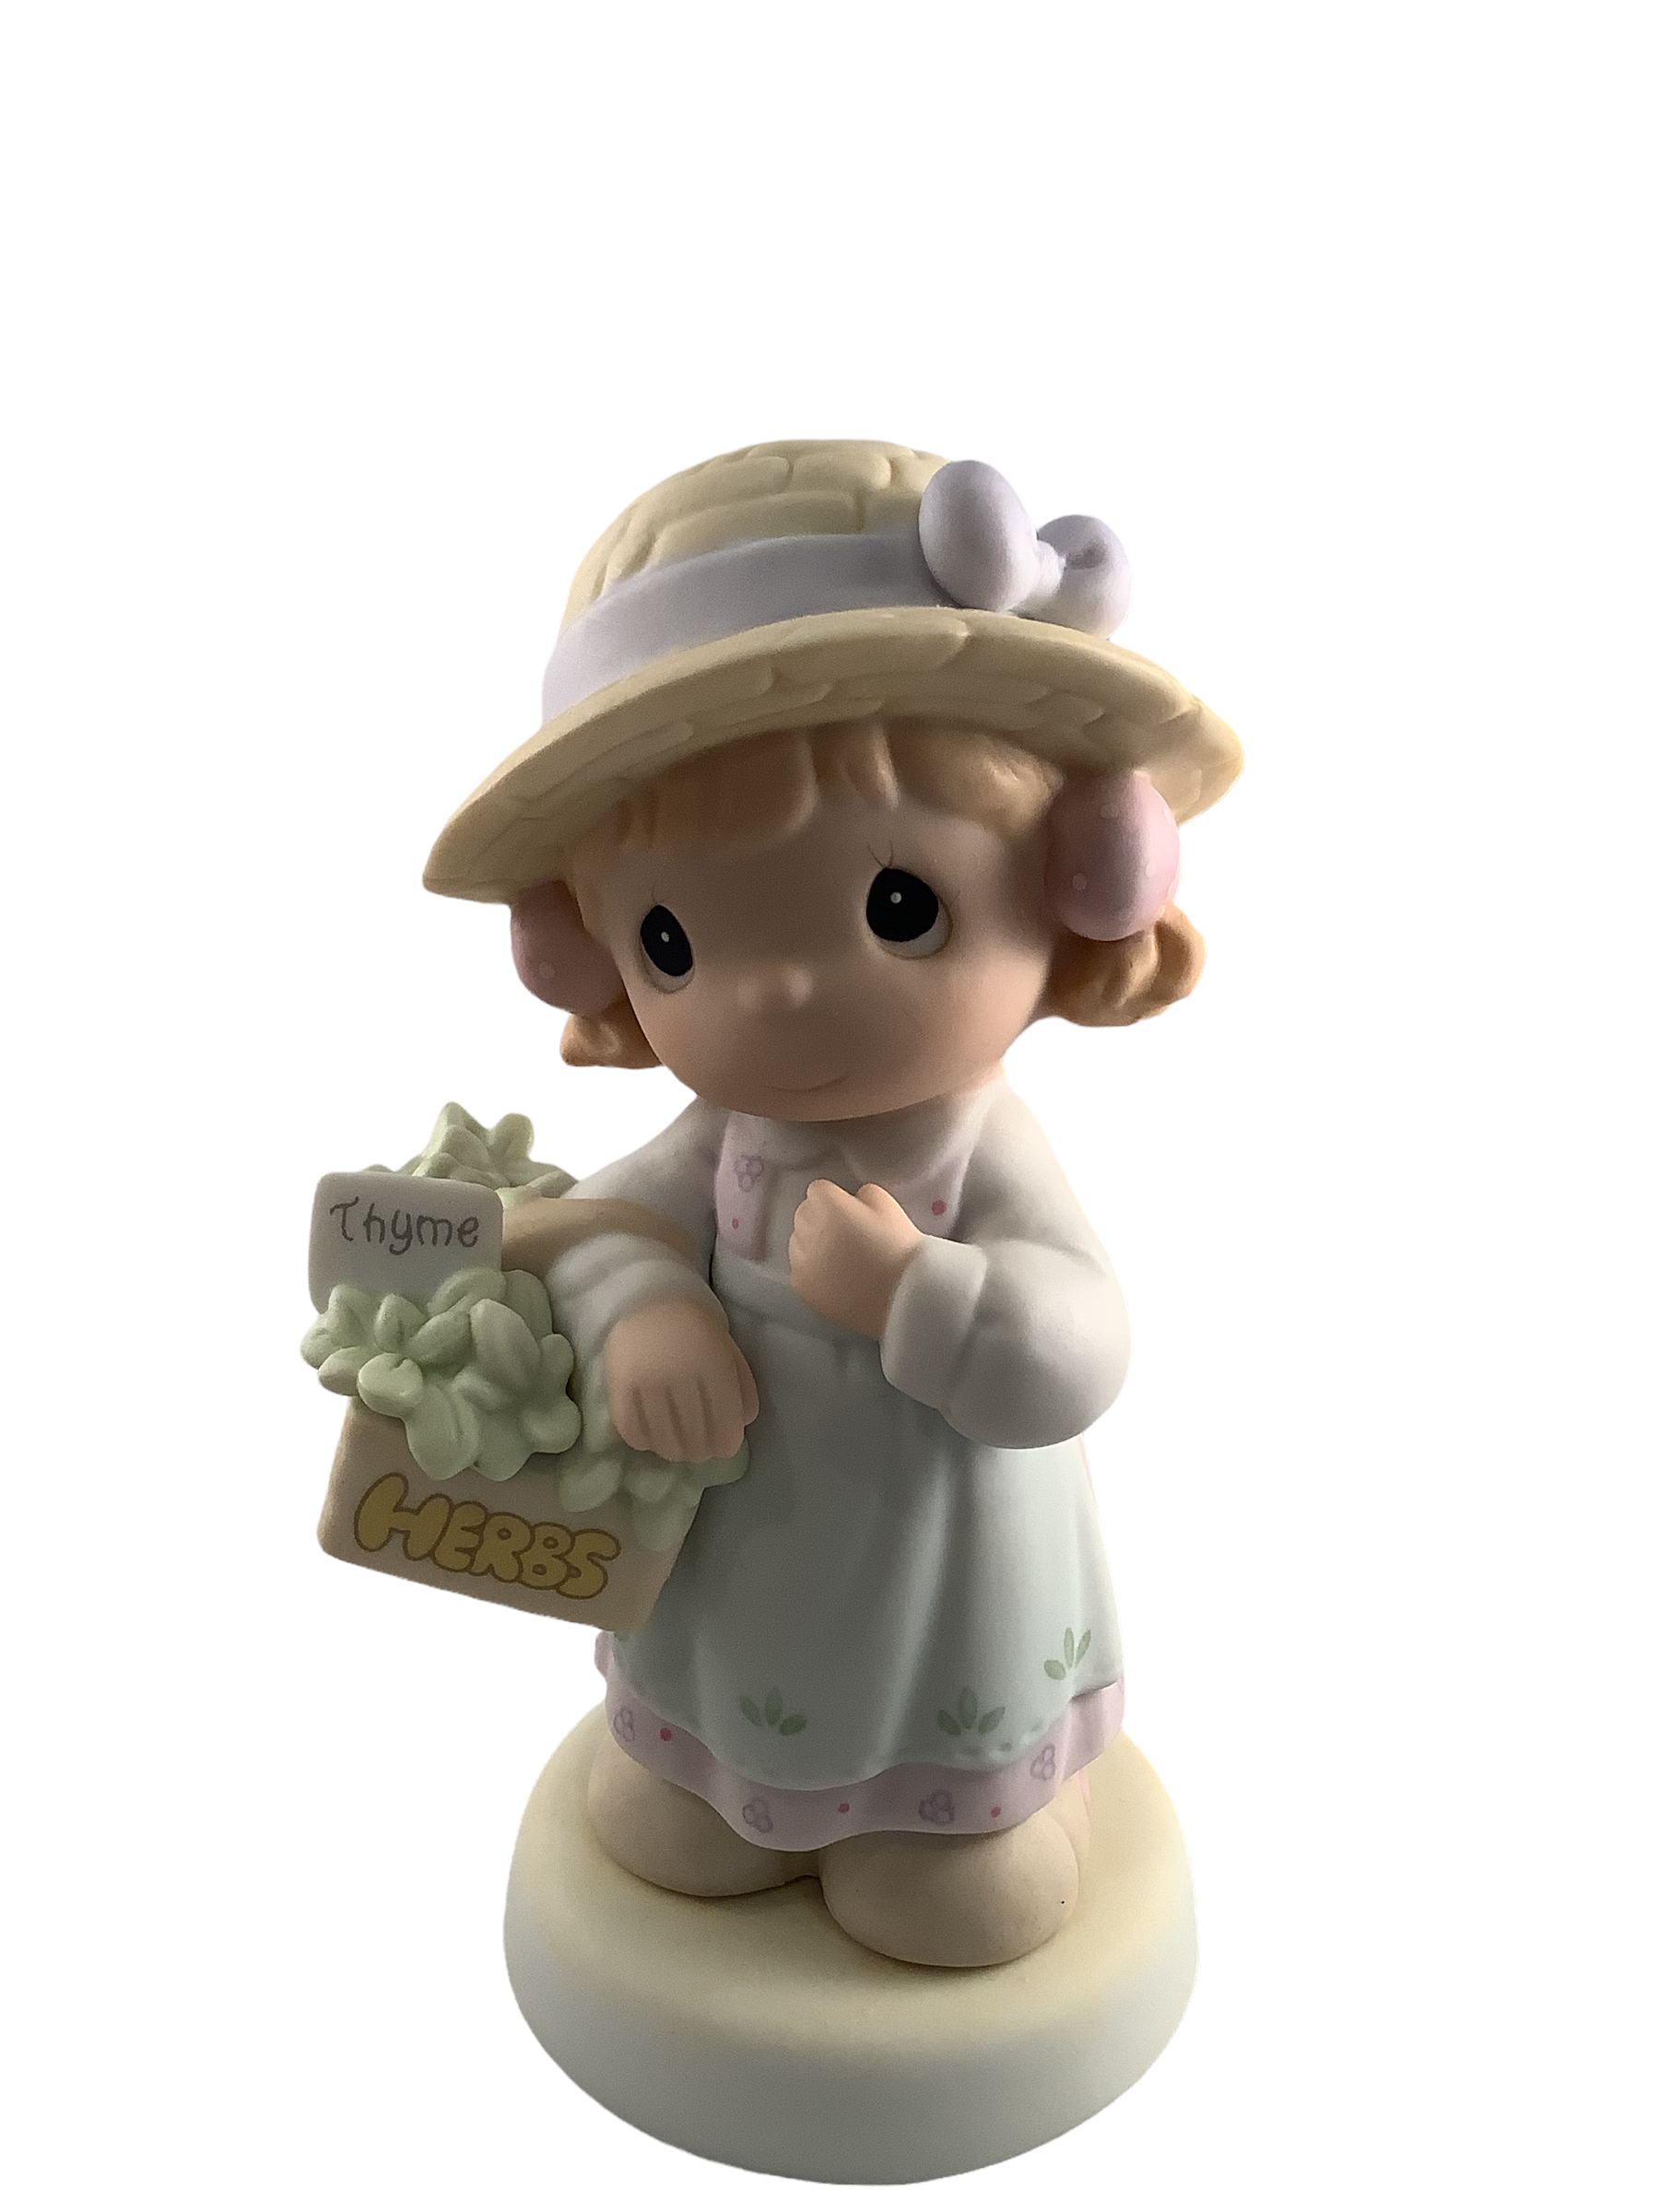 Take Thyme For Yourself - Precious Moment Figurine